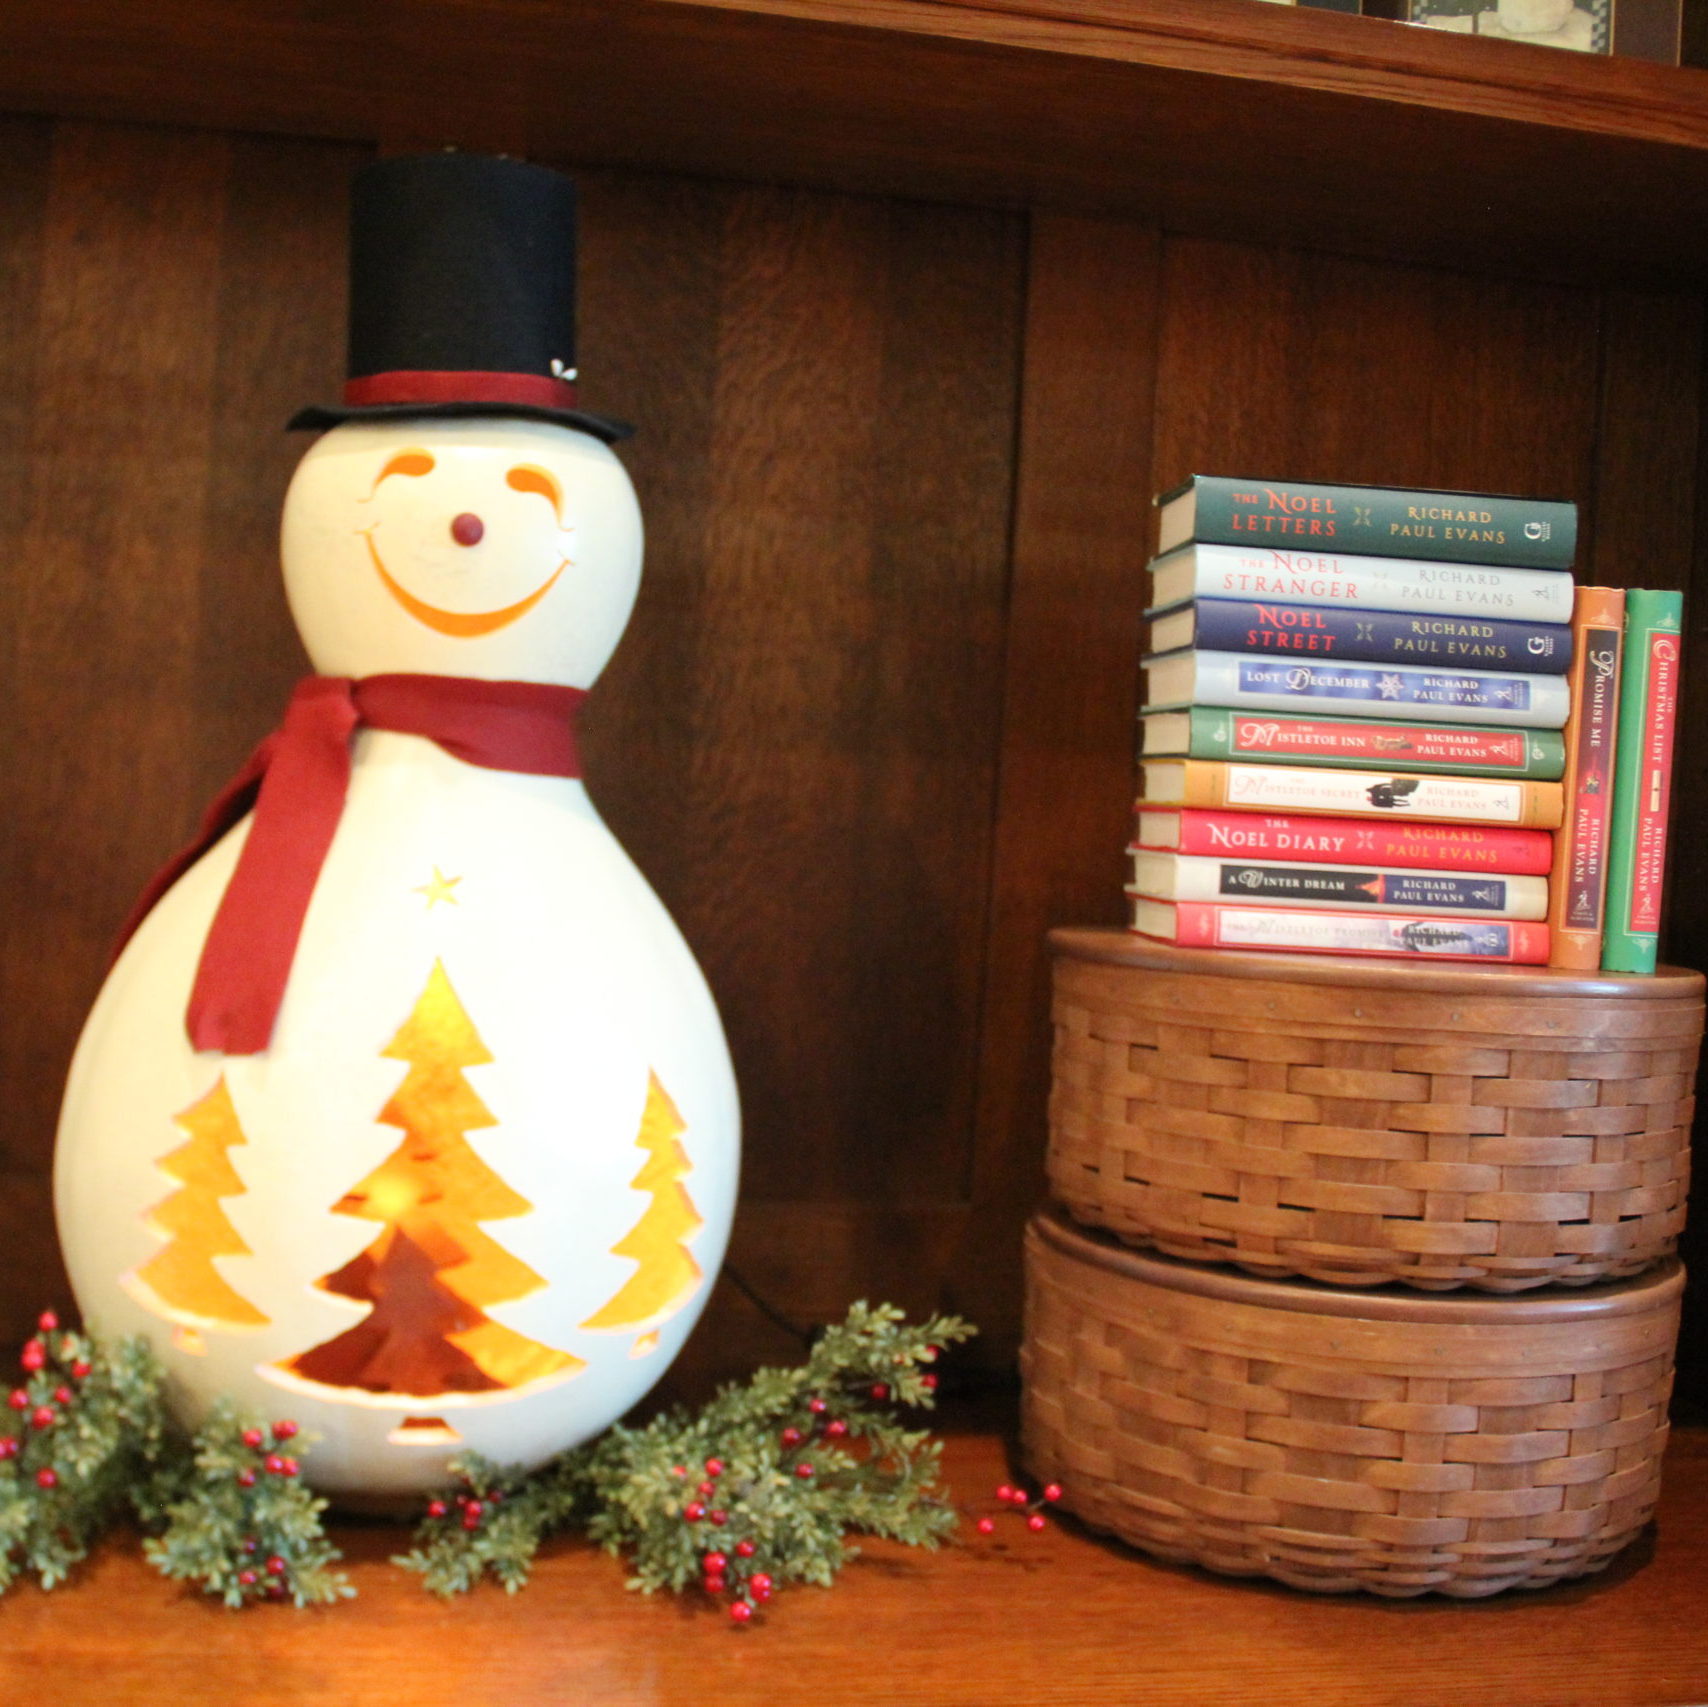 This jolly snowman is one of my favorite Meadowbrooke Gourds! With a couple of stacked Longaberger baskets and  holiday books by a favorite author I like how this turned out.